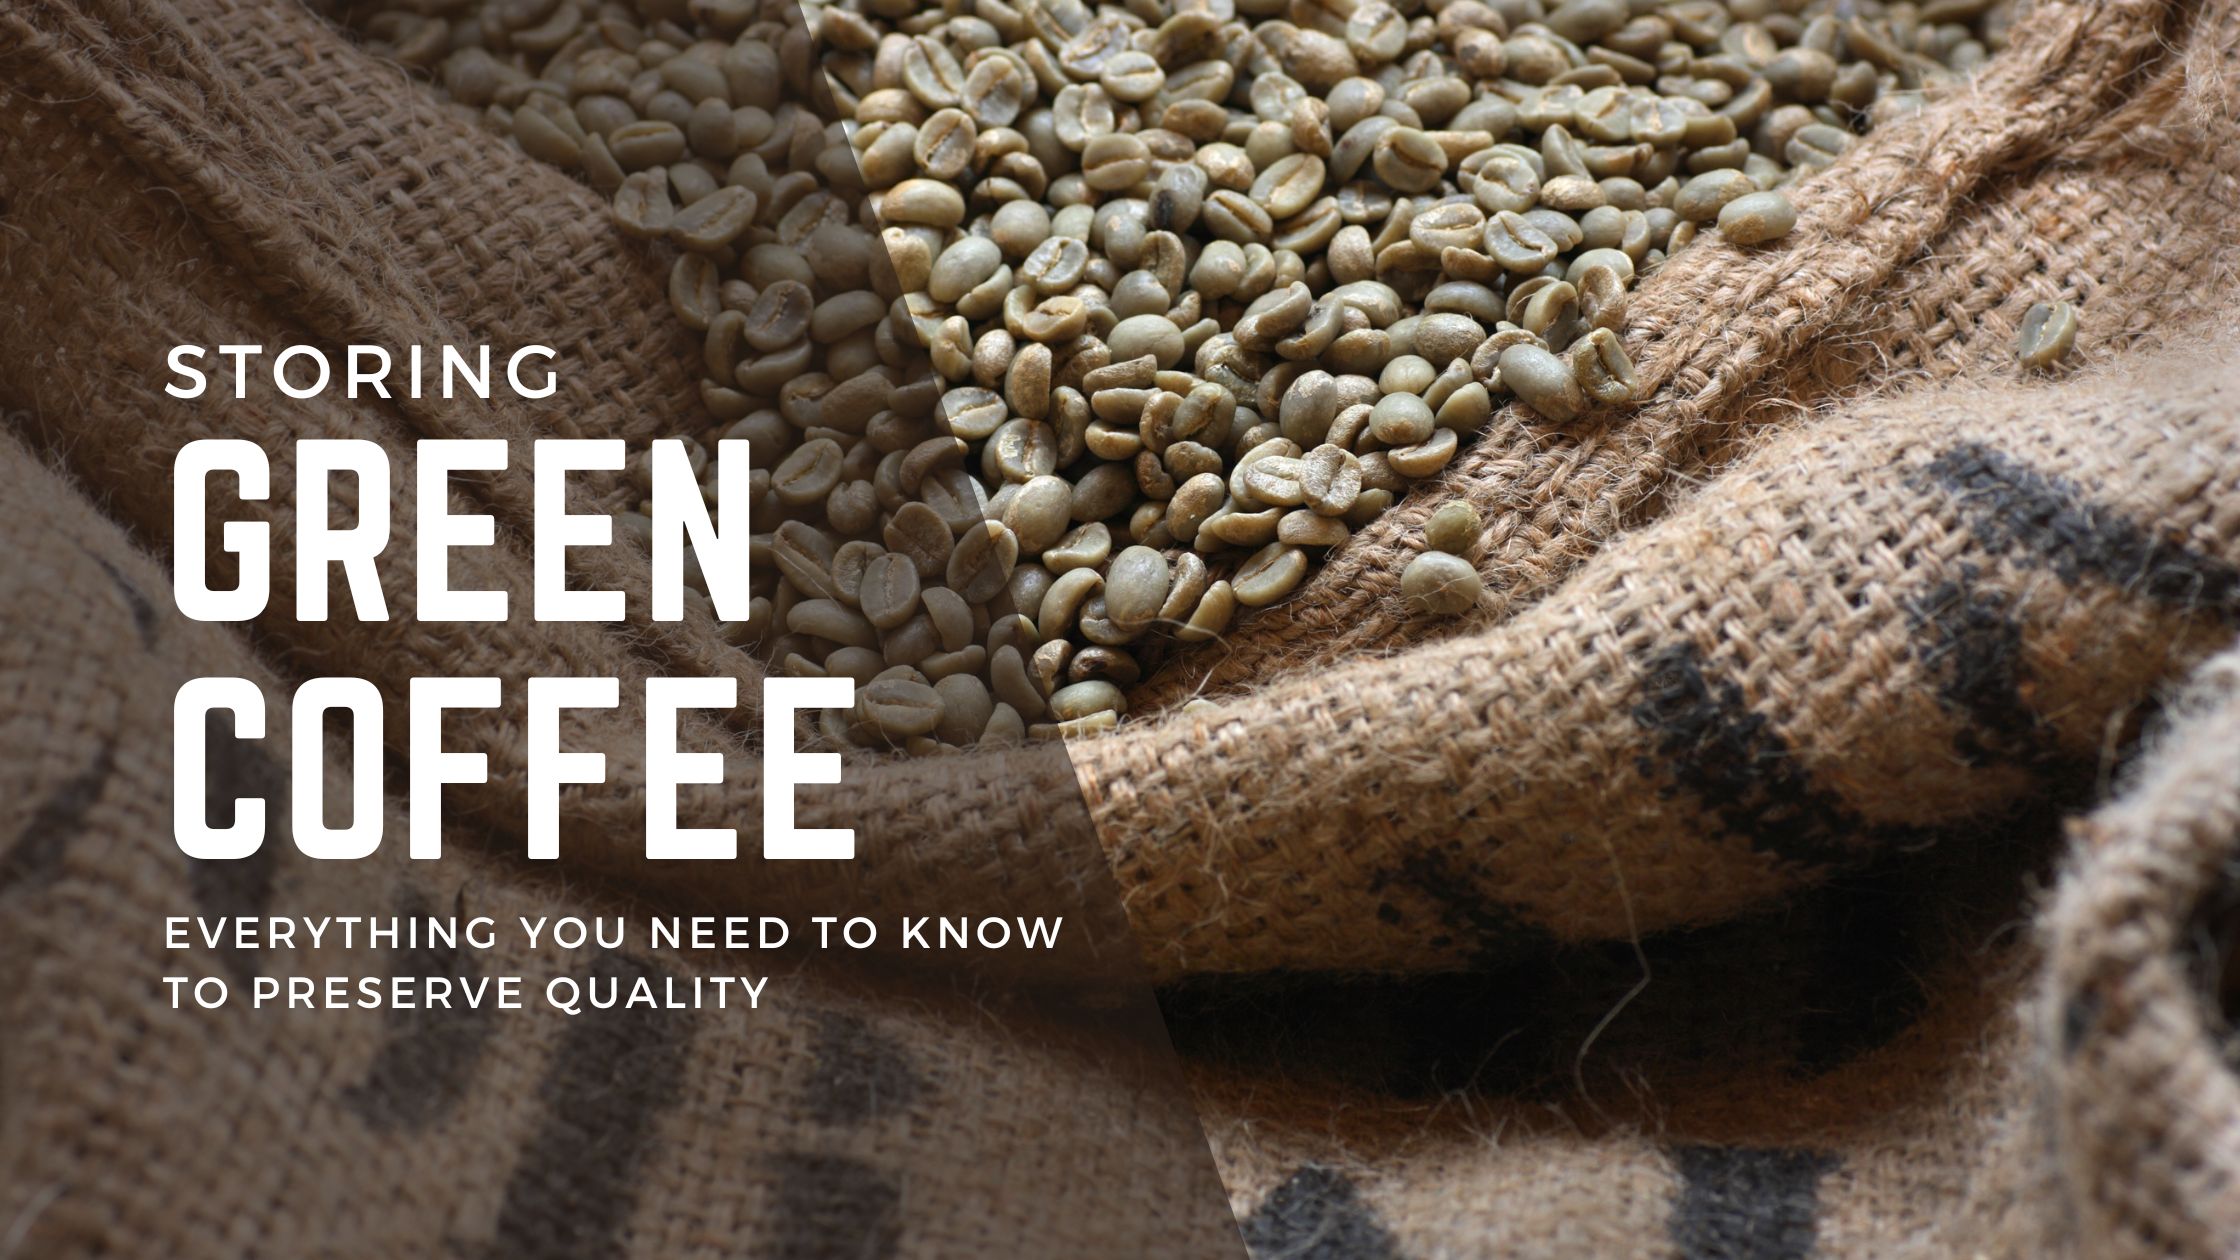 How to Store Green Coffee